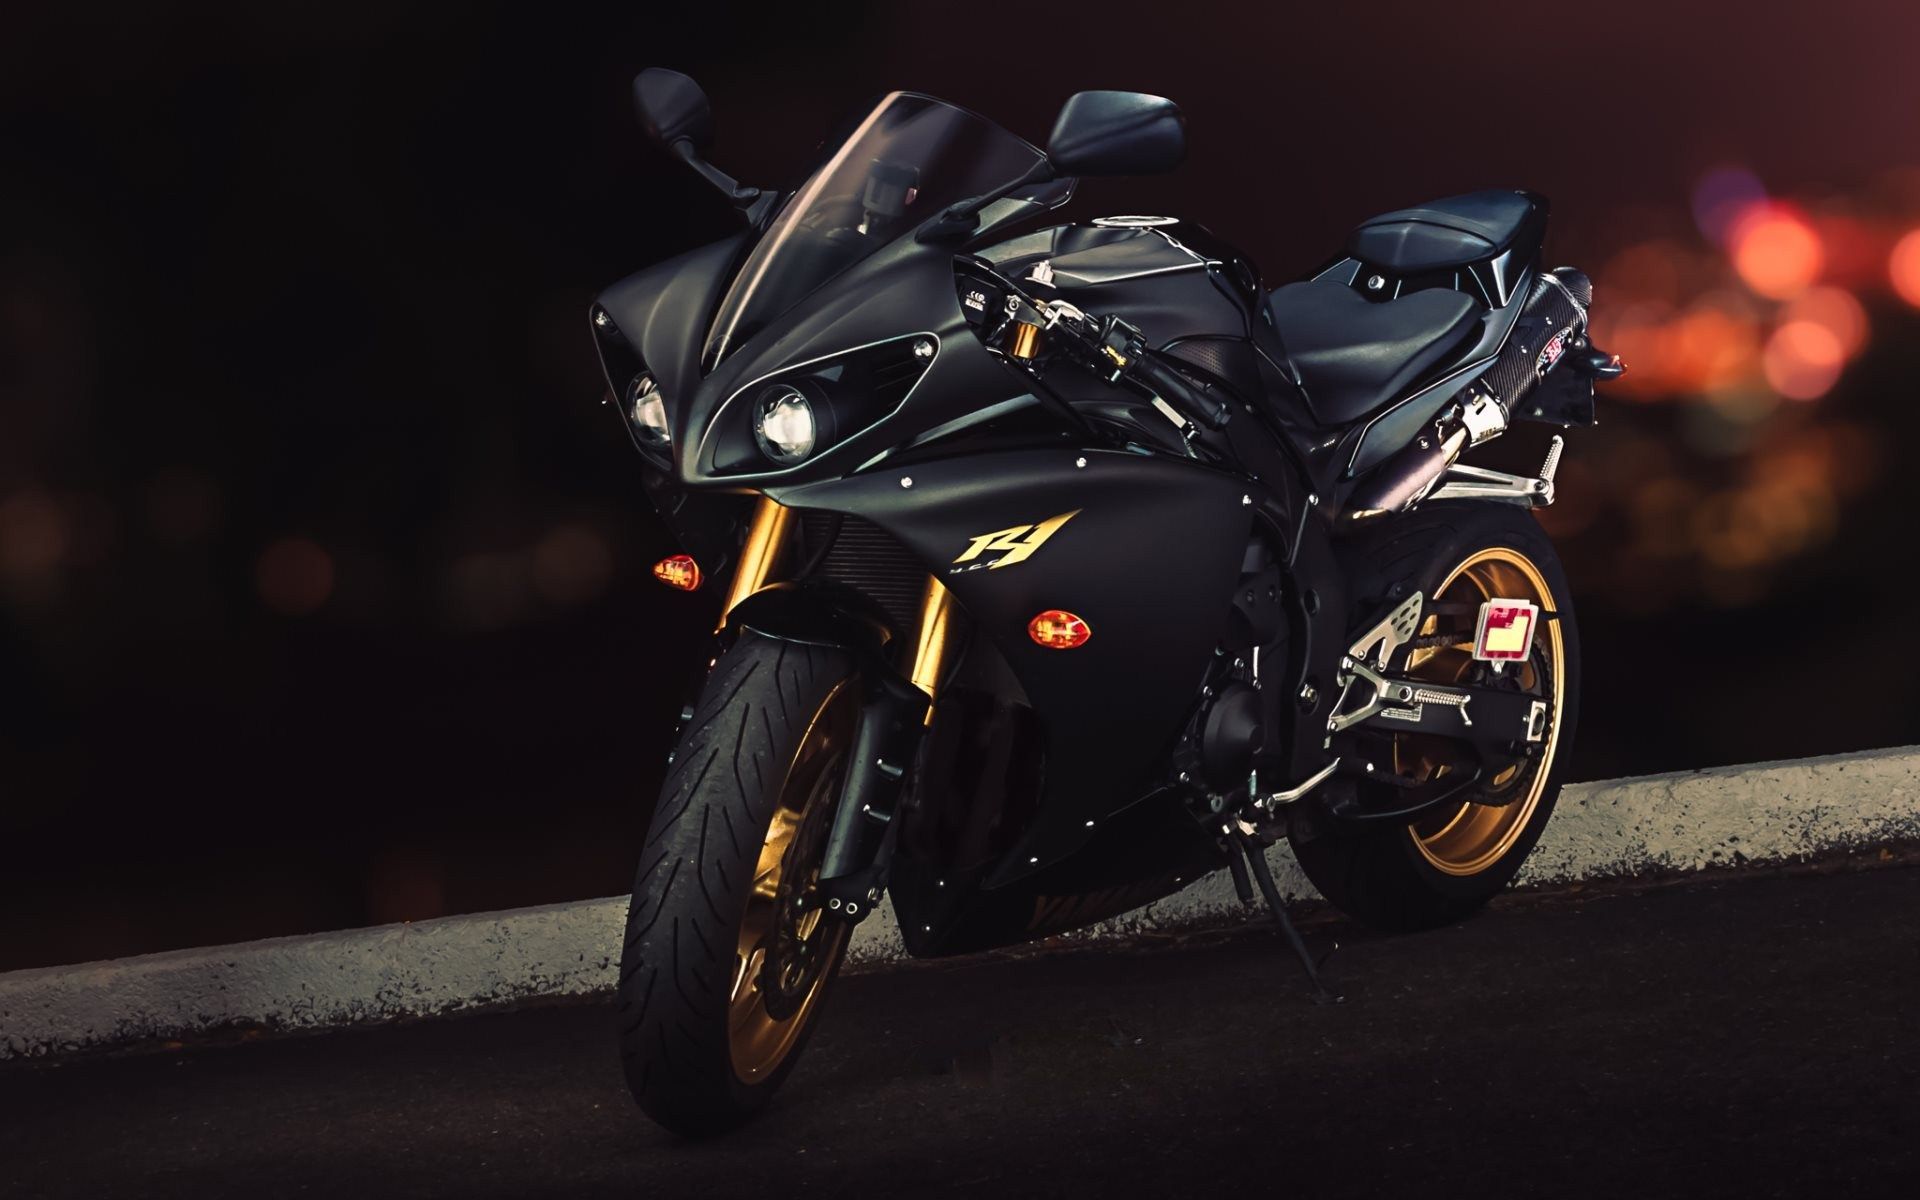 2 Yamaha Yzf R1 HD Wallpapers | Backgrounds - Wallpaper Abyss